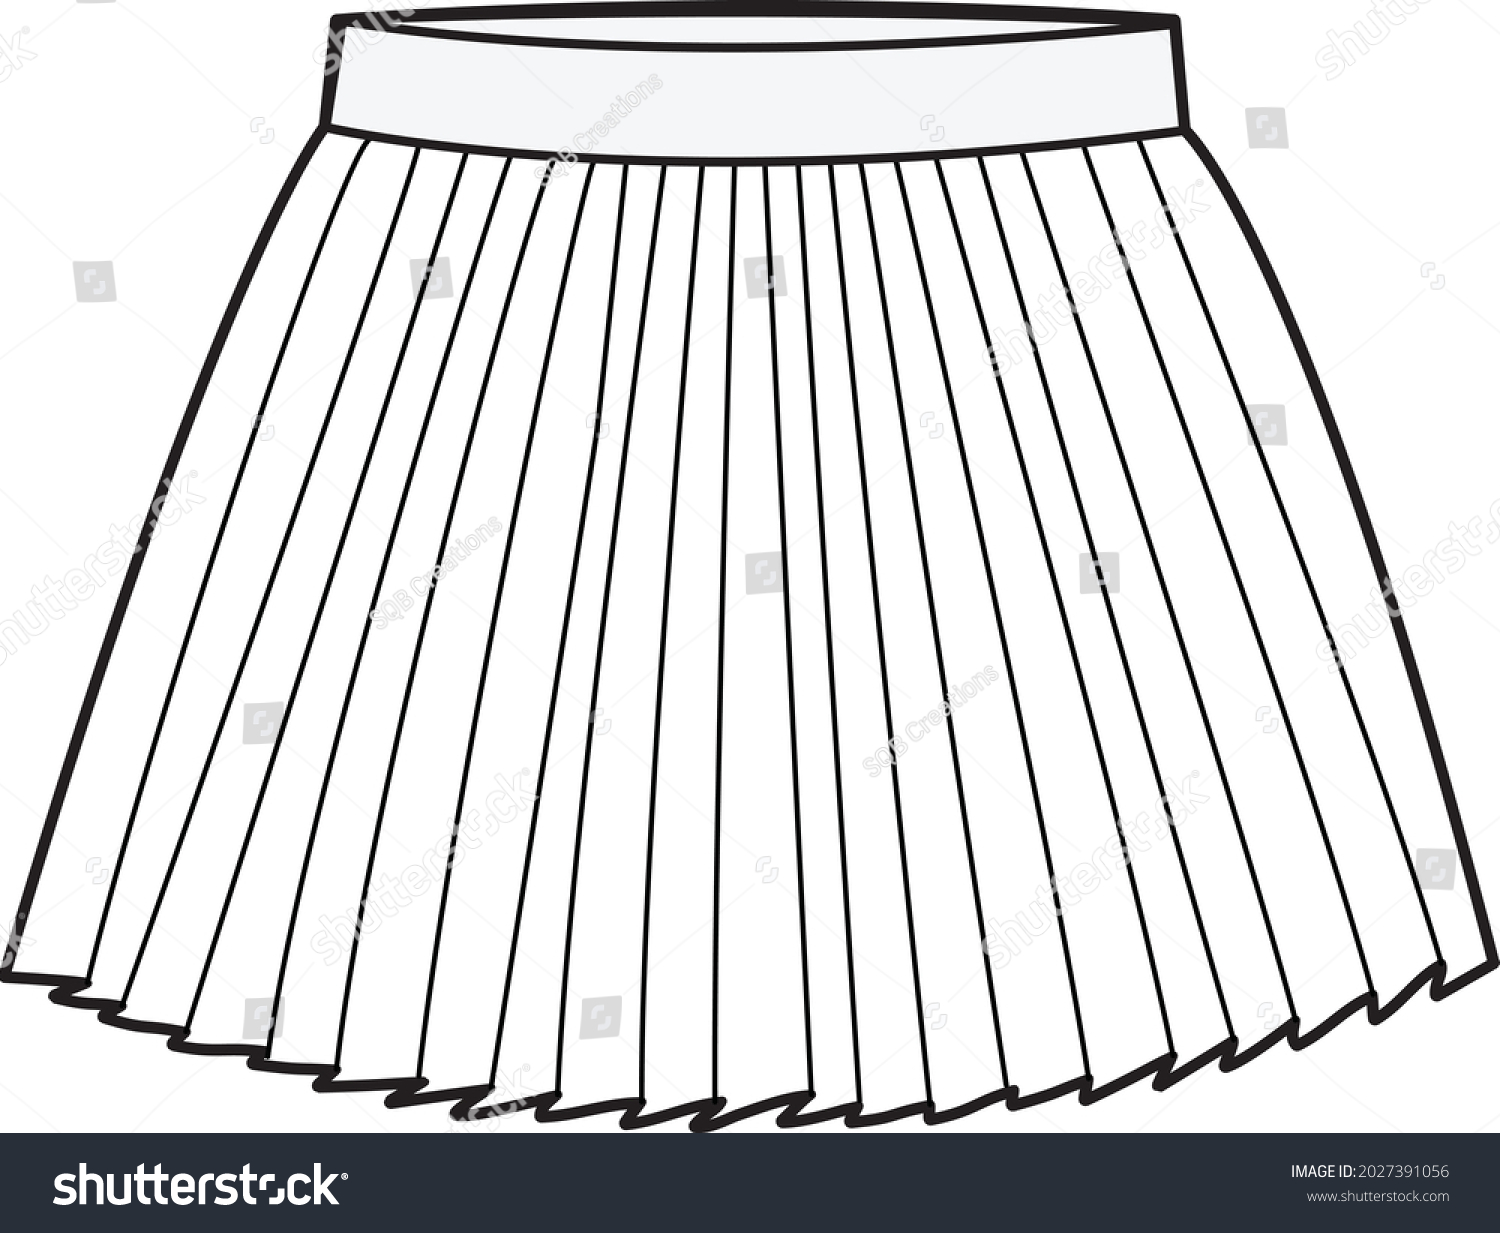 Women Pleated Tulle Skirt Flat Sketch Stock Vector (Royalty Free ...